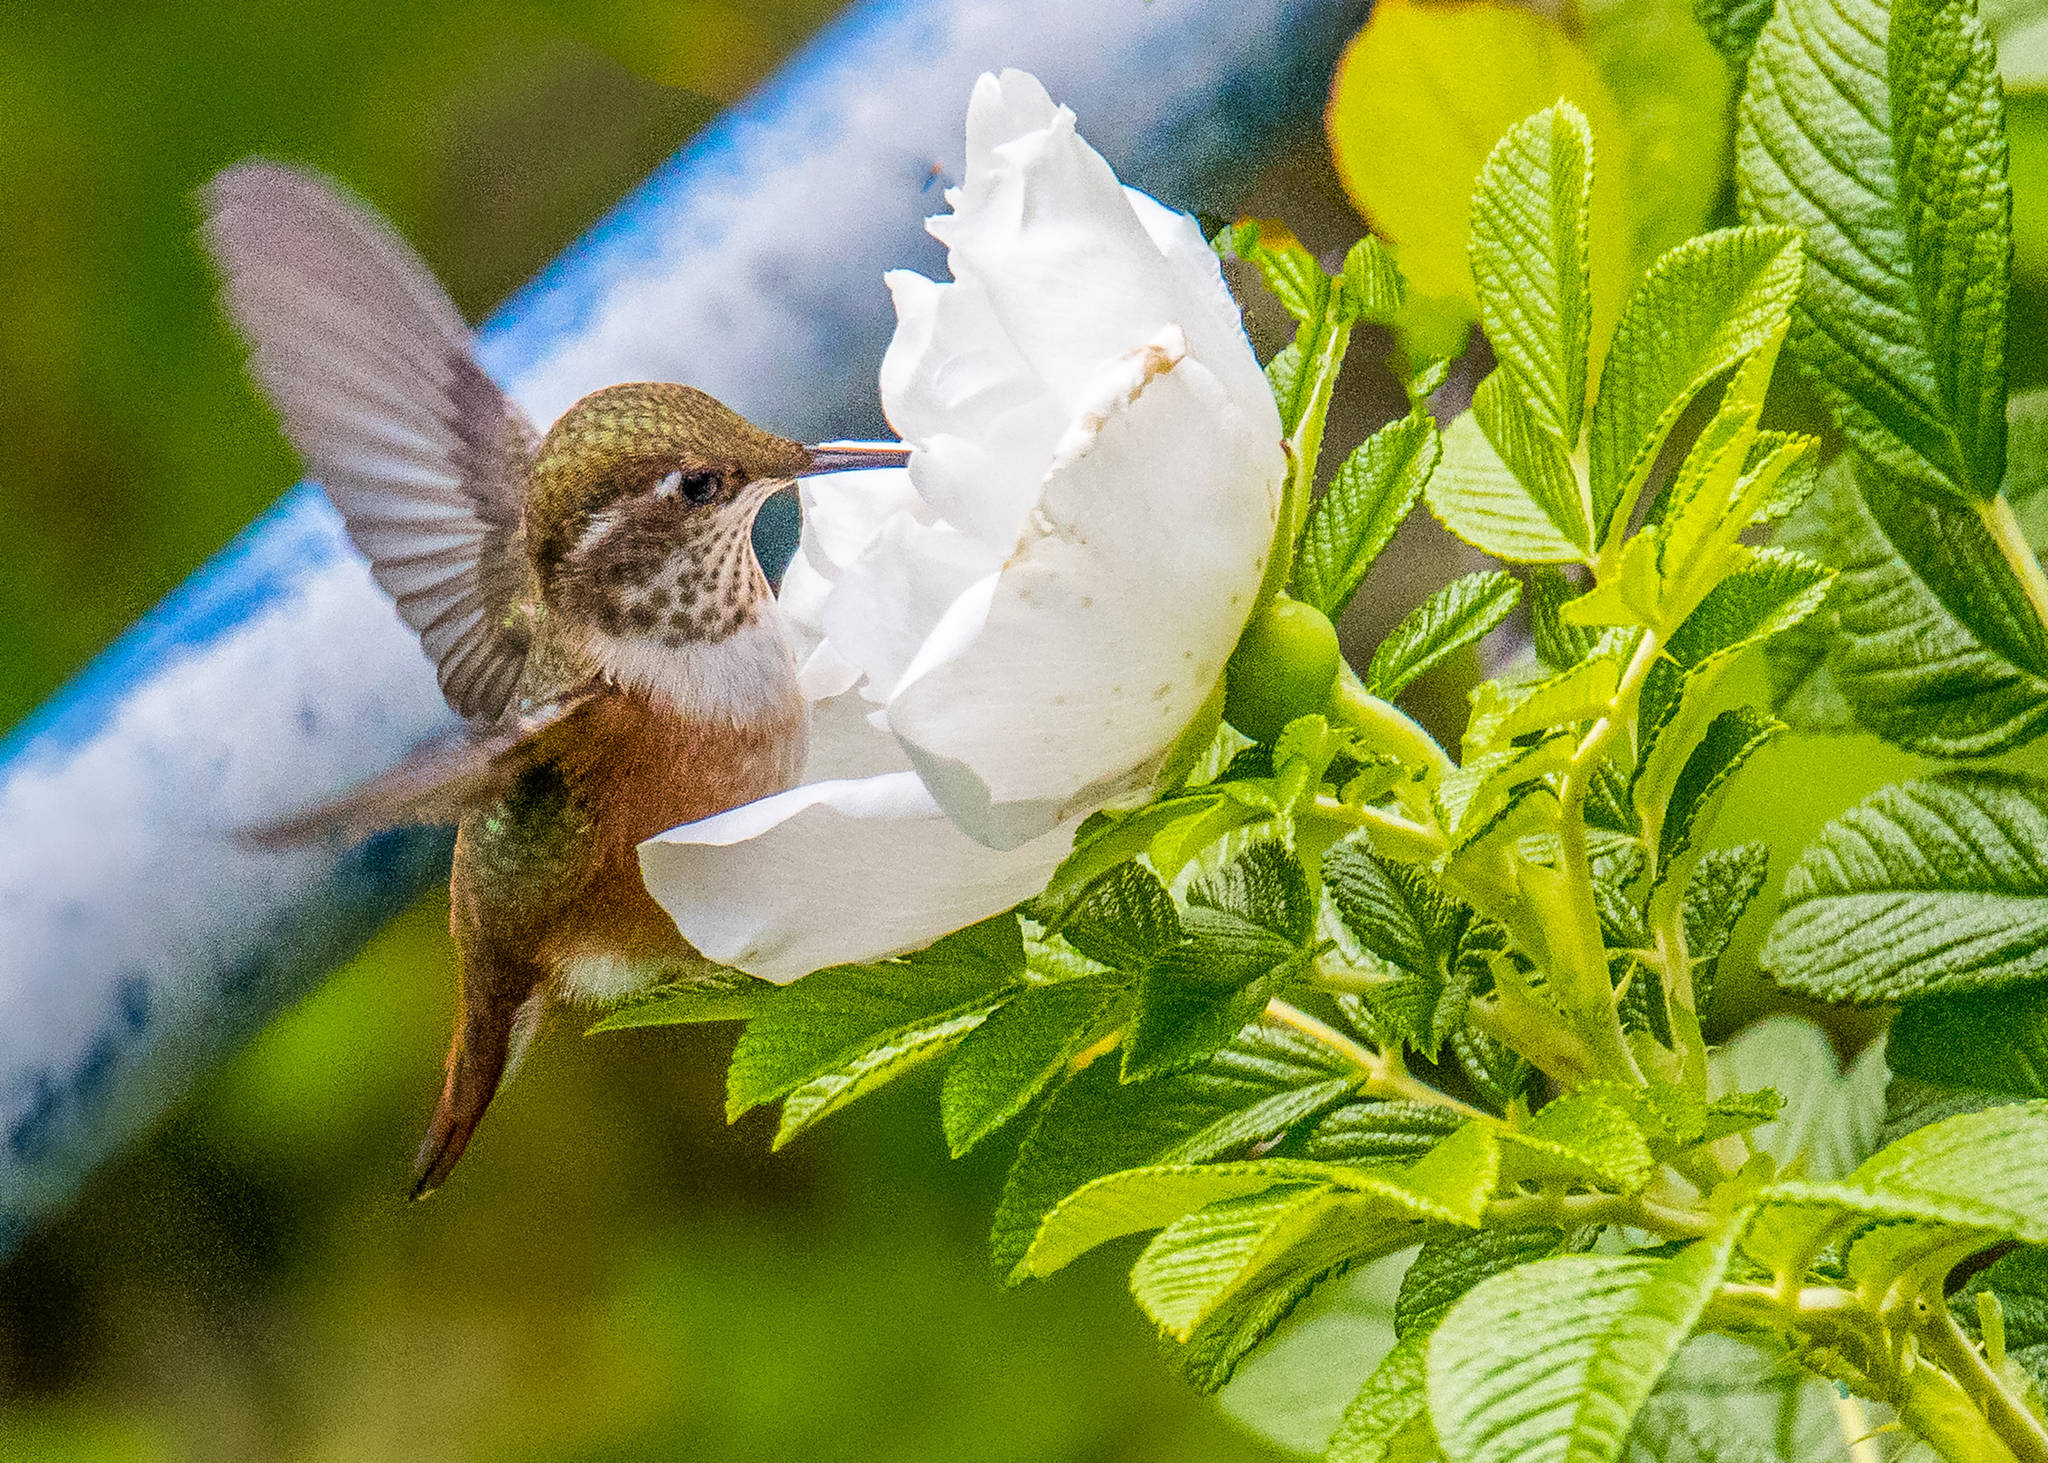 A rufous hummingbird stops to smell the roses in the Lena Cove area on July 29, 2019. (Courtesy Photo | Kerry Howard)